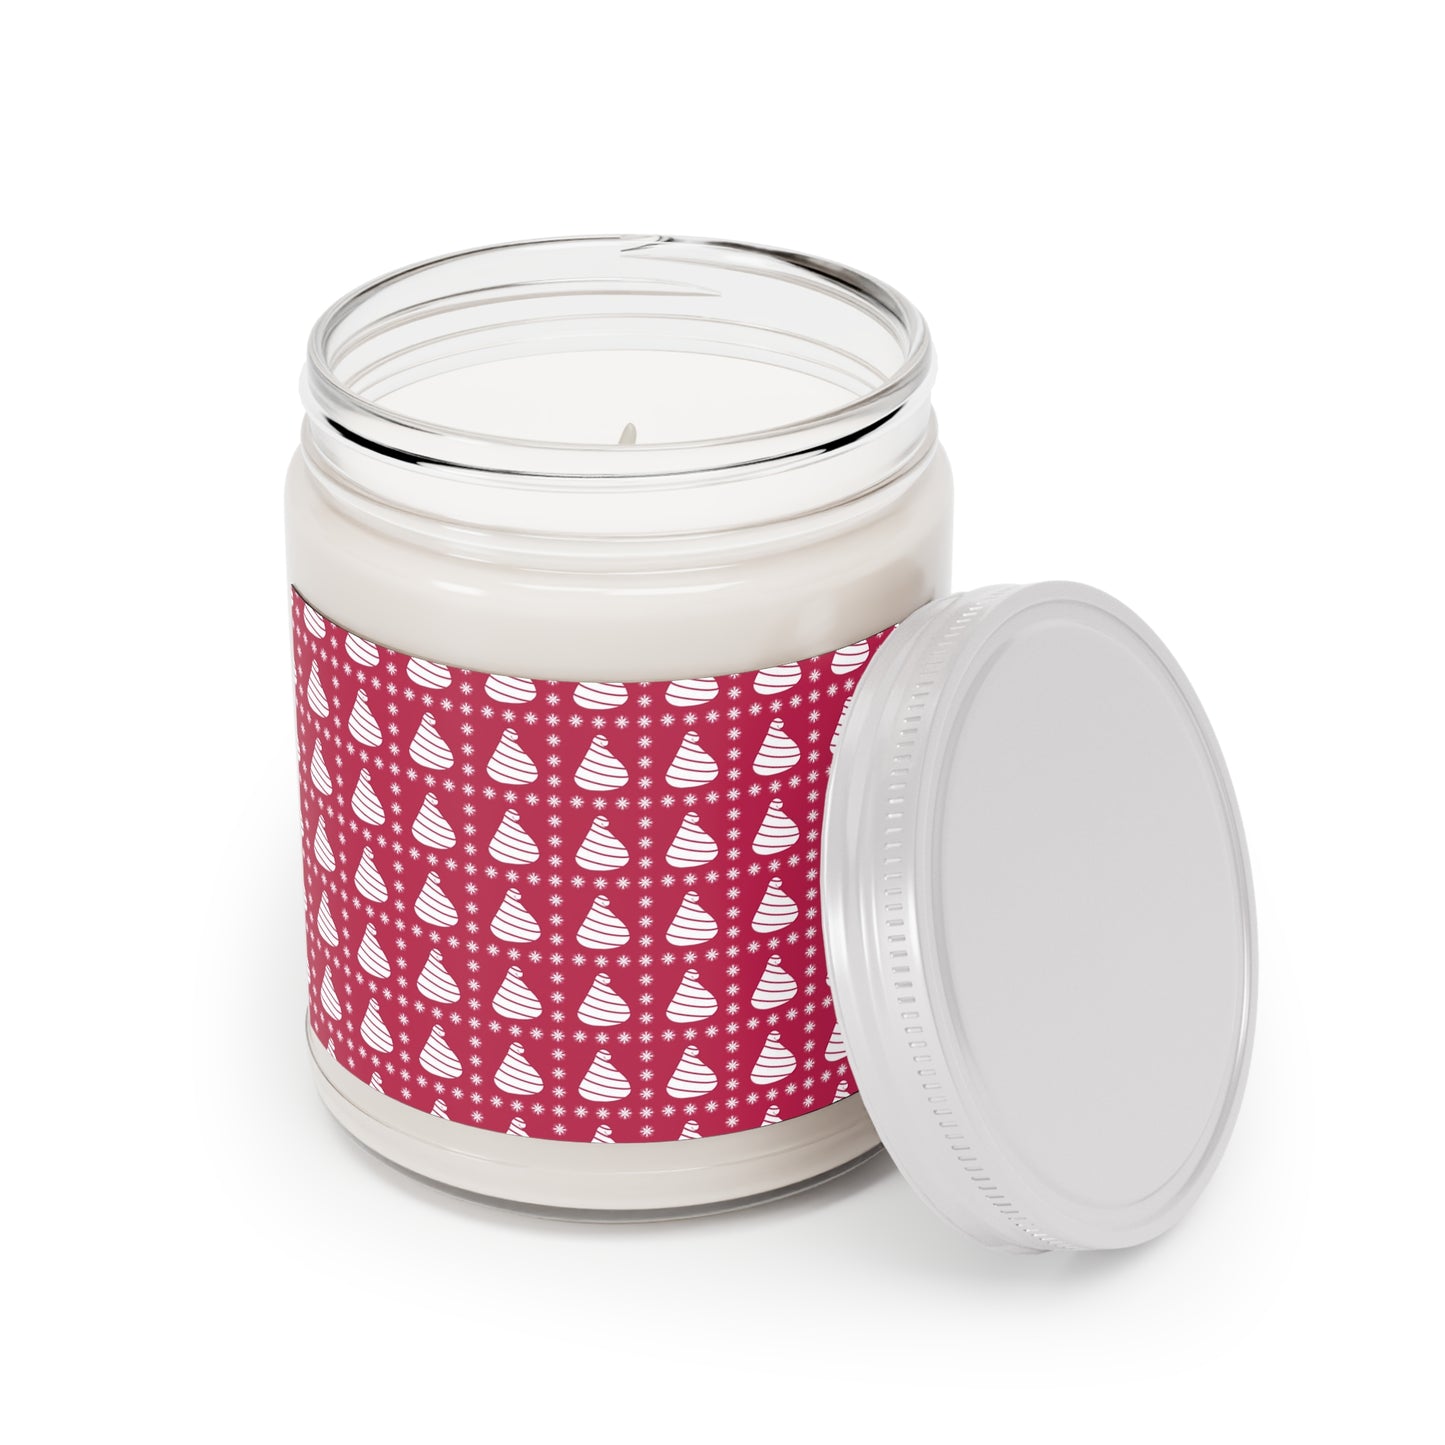 Peppermint Kisses Scented Candles, 9oz